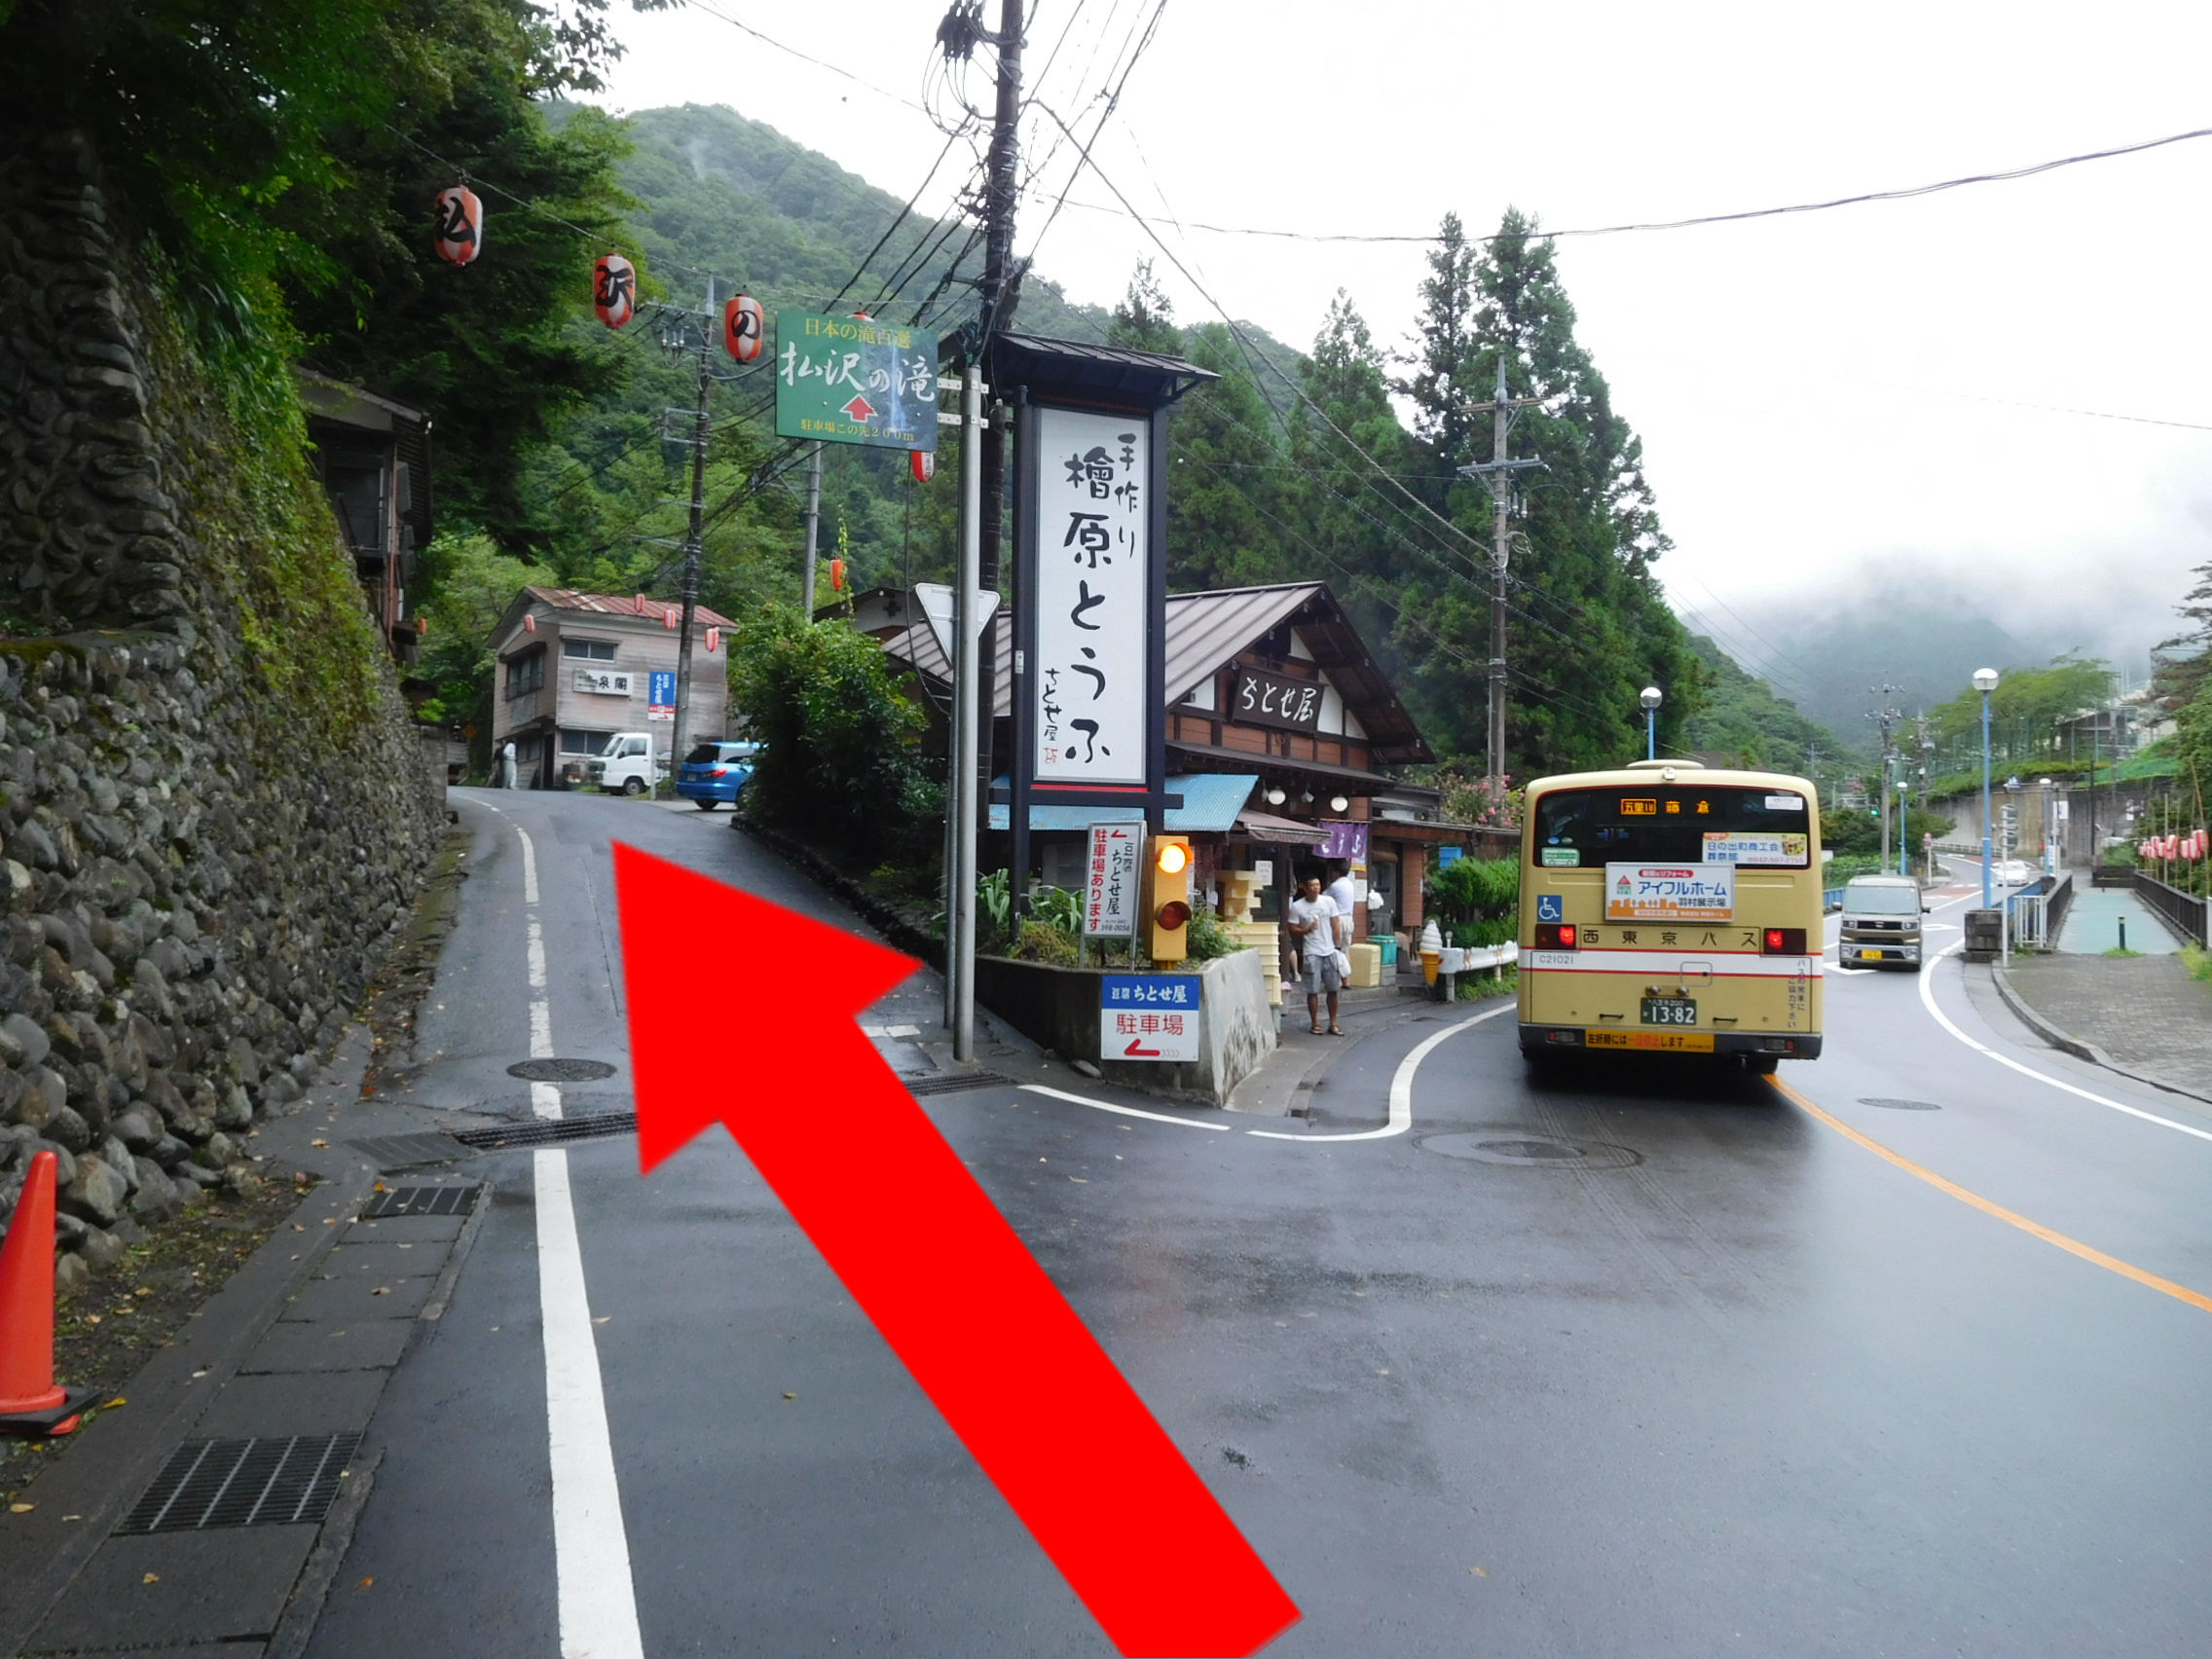 A little farther on, there are a parking lot of Hosawa Waterfall.